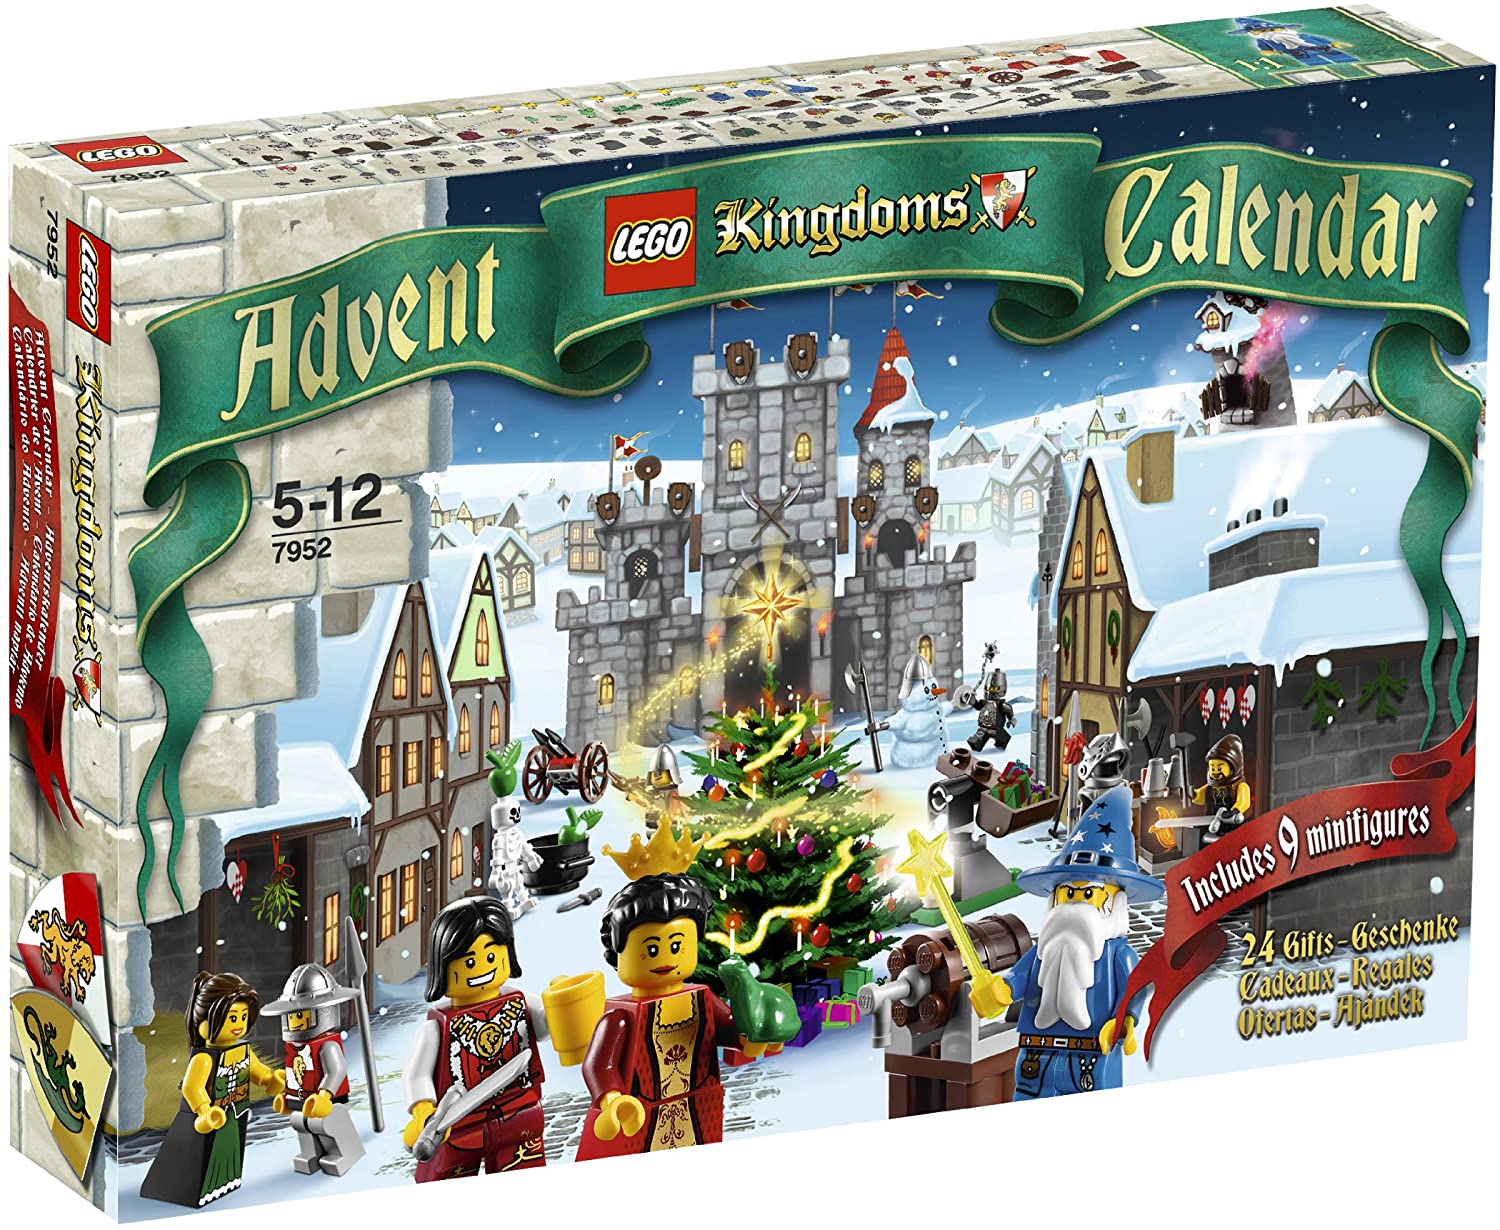 Top 9 Best LEGO Christmas Reviews in 2022 8